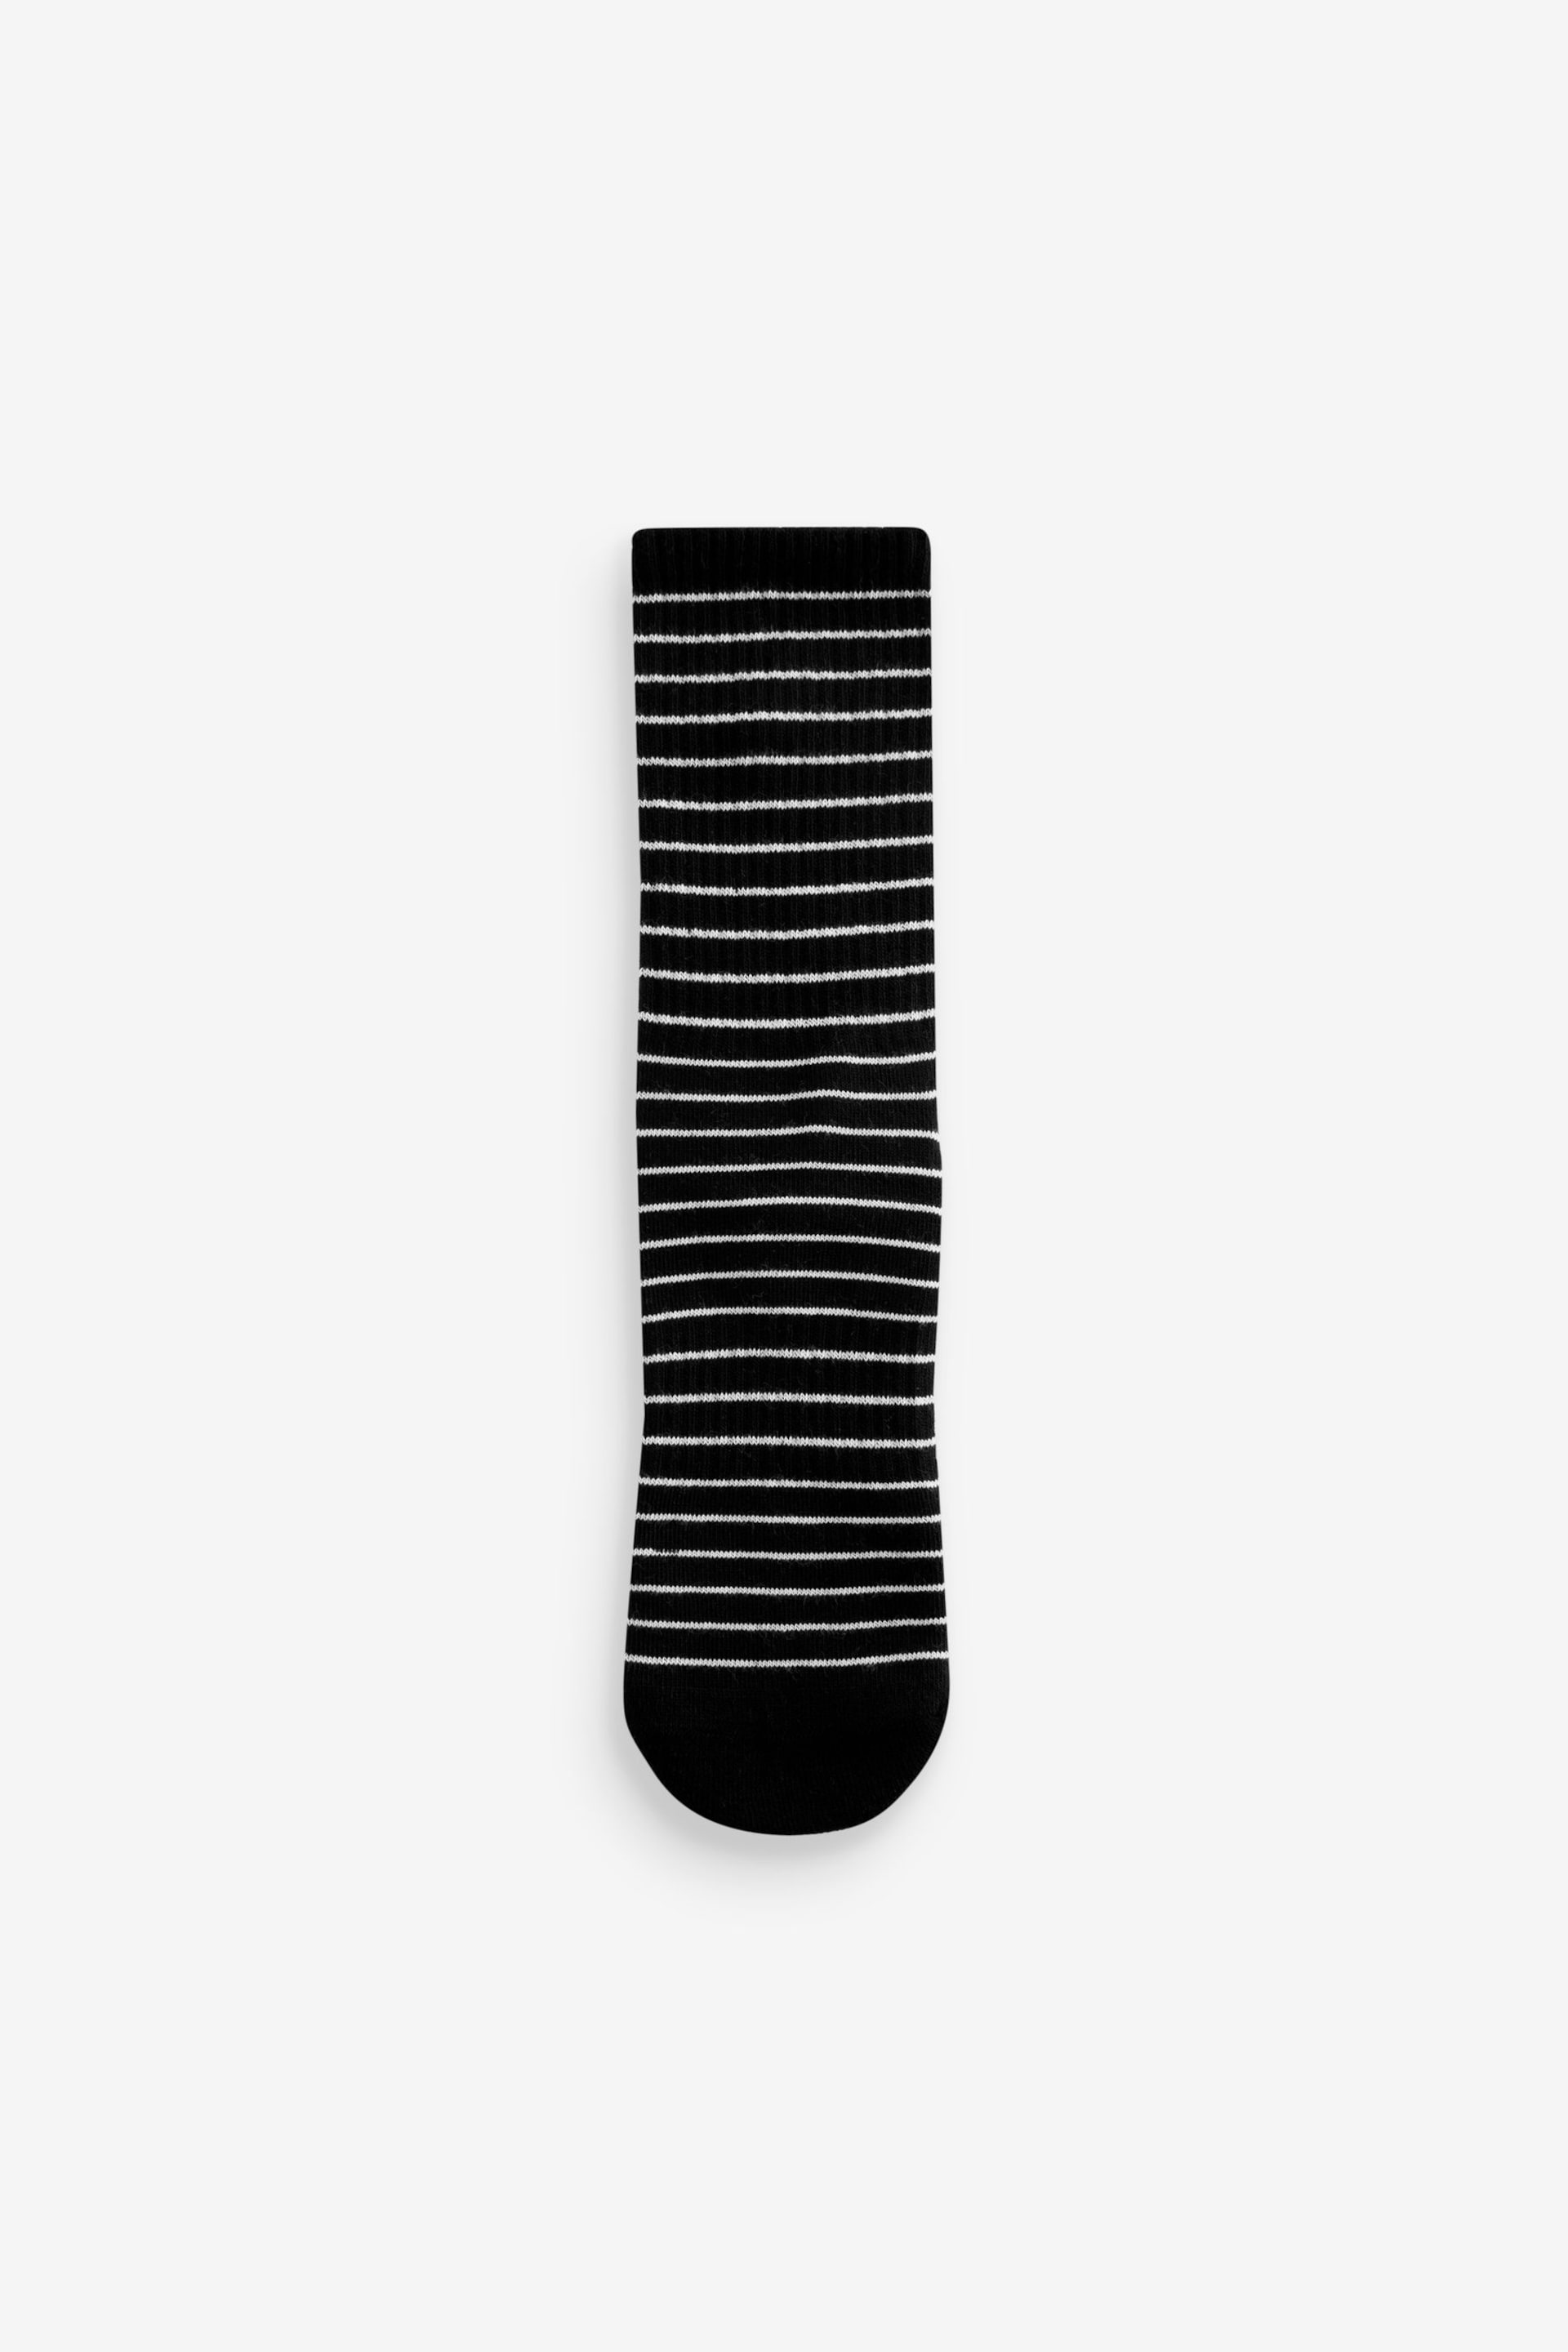 Black/White/Grey/Brown Stripe Cushion Sole Ribbed Ankle Socks With Arch Support 4 Pack - Image 4 of 5